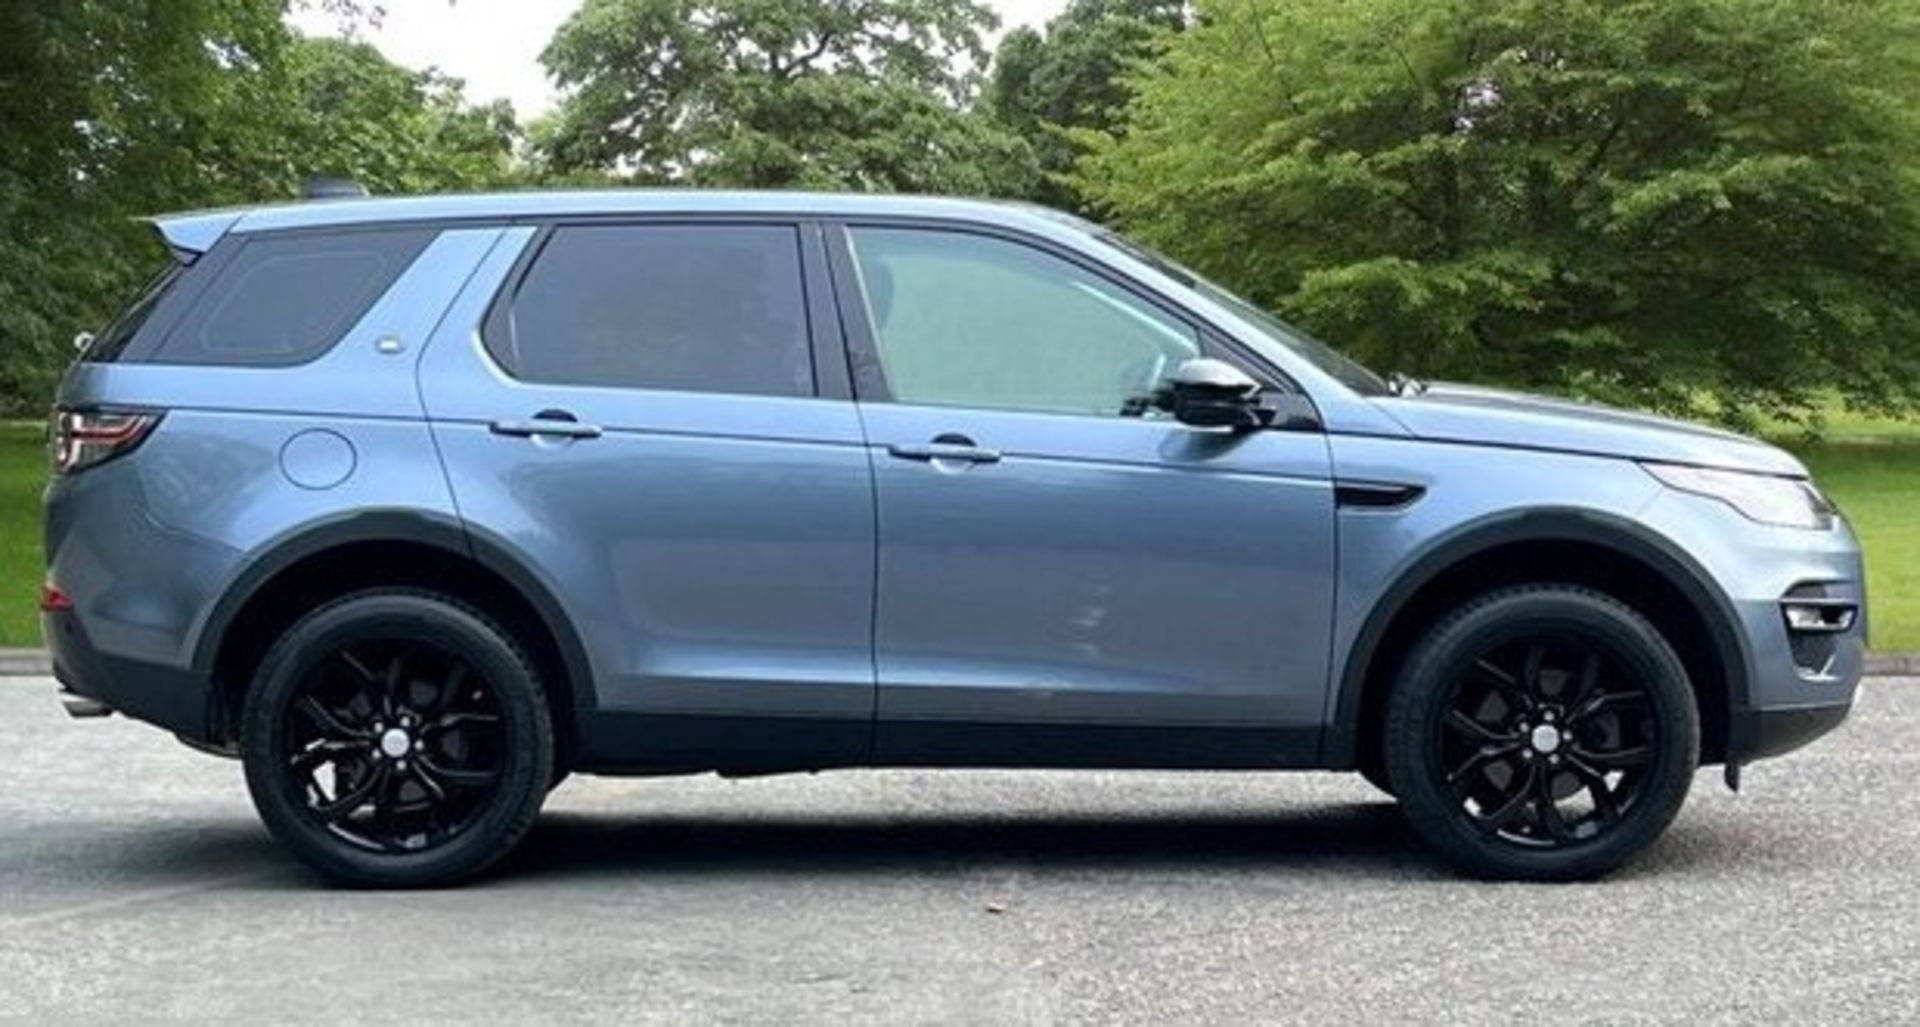 ** ON SALE ** Land Rover Discovery Sport 2.0 ED4 150 HSE 2018 '18 Reg' Sat Nav - Panoramic Roof - Image 3 of 4